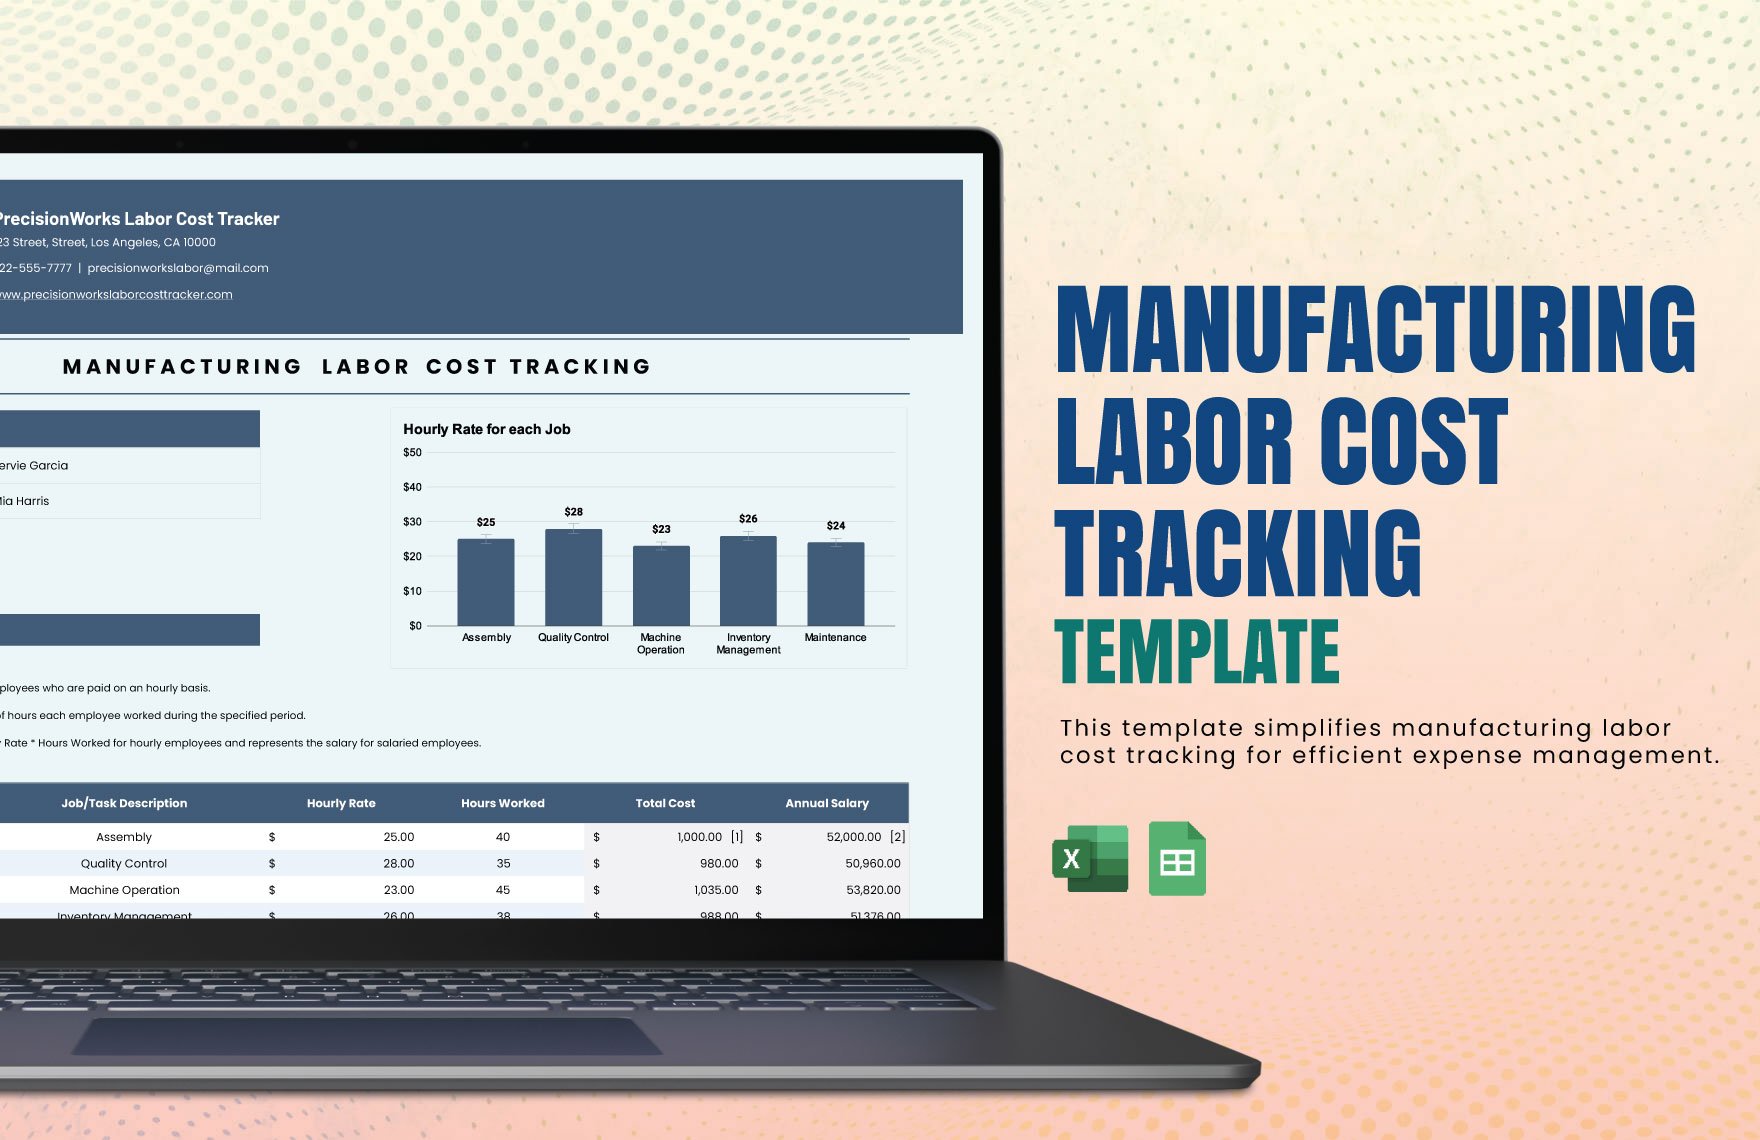 Manufacturing Labor Cost Tracking Template